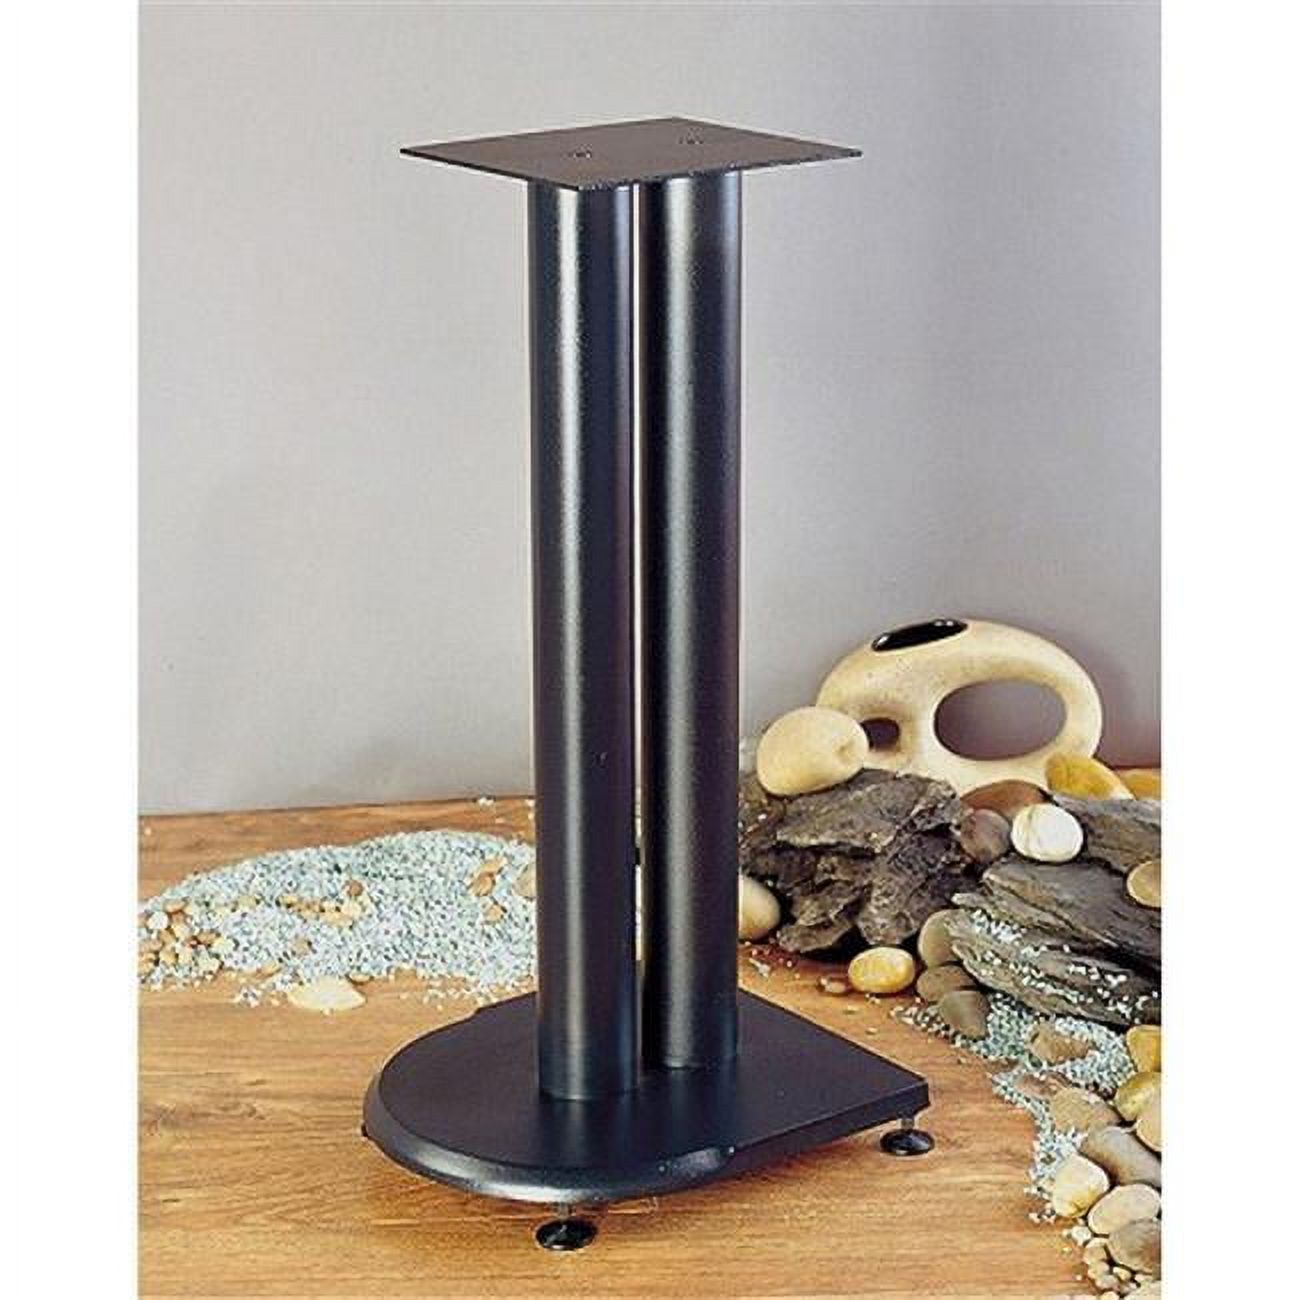 VTI Manufacturing UF19 19 in. H- Iron Center Channel Speaker Stand - Black - image 1 of 1